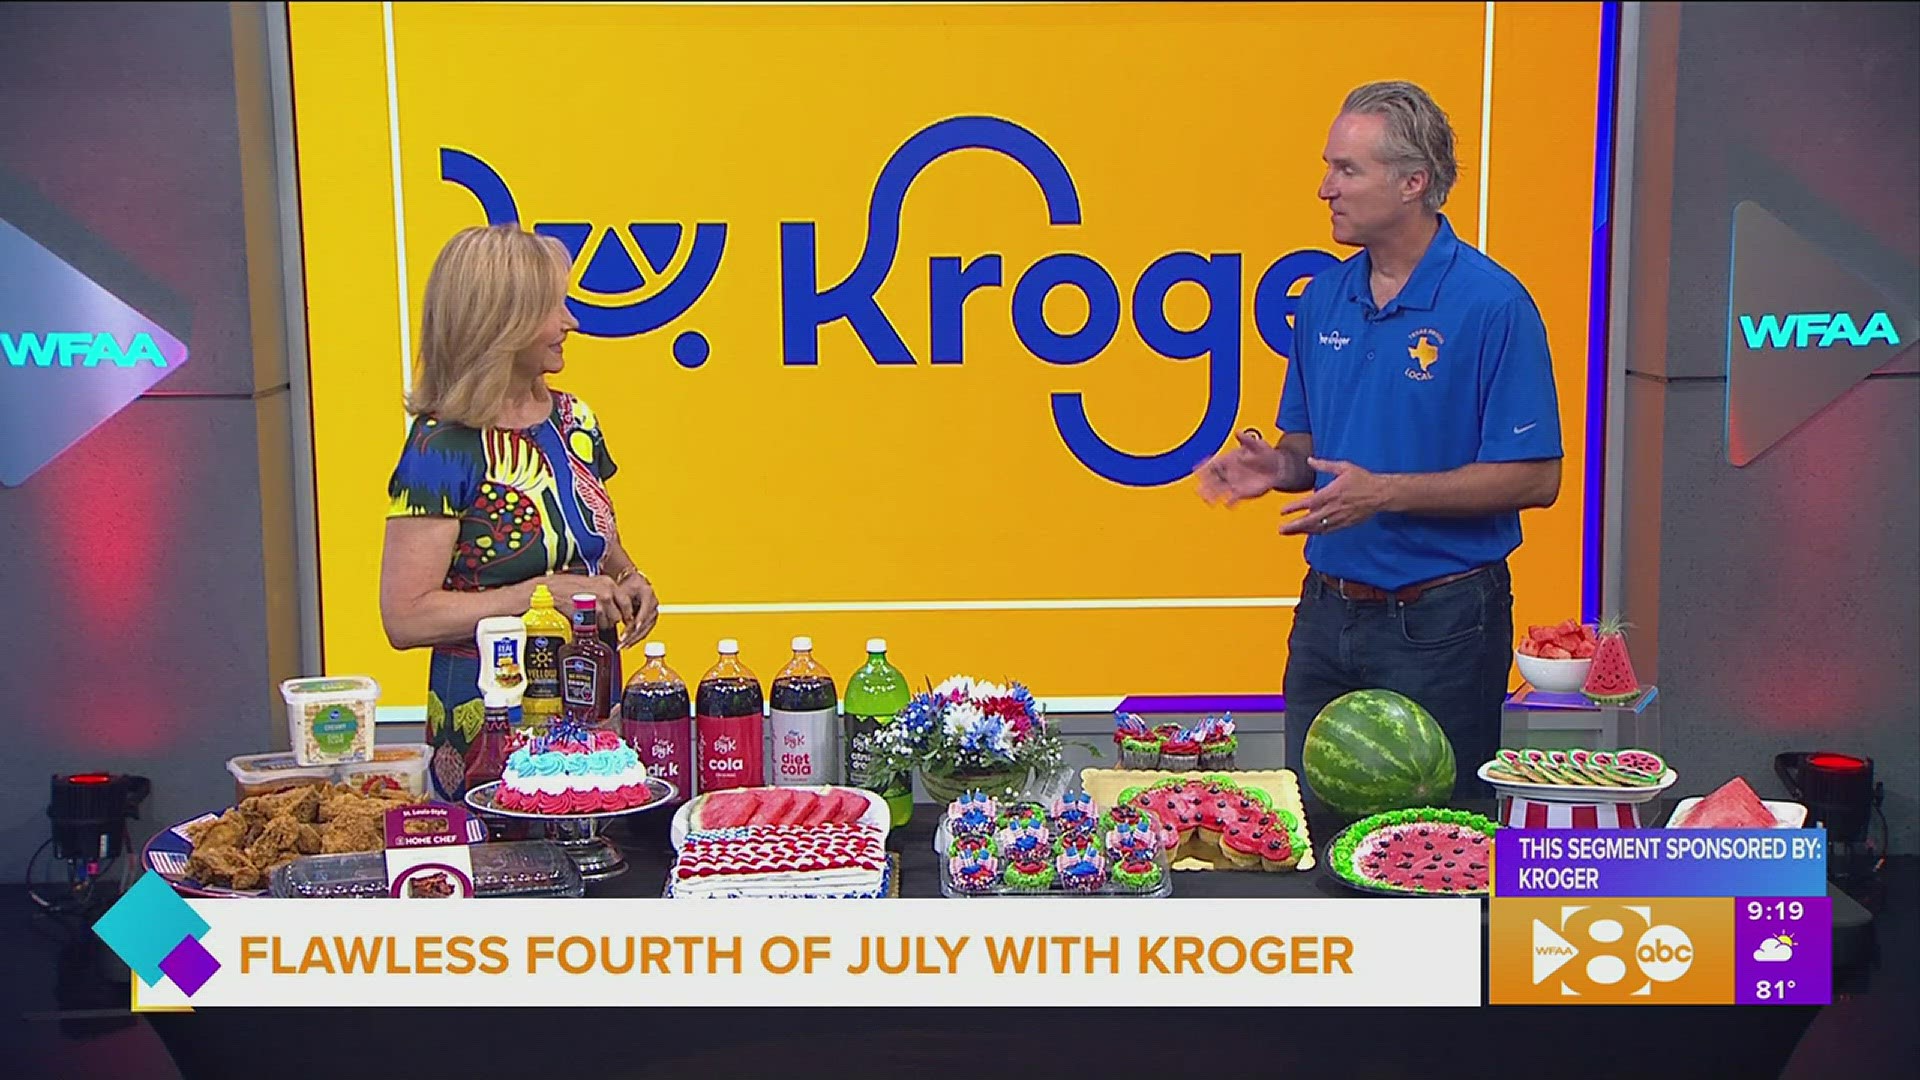 Flawless 4th of July with Kroger